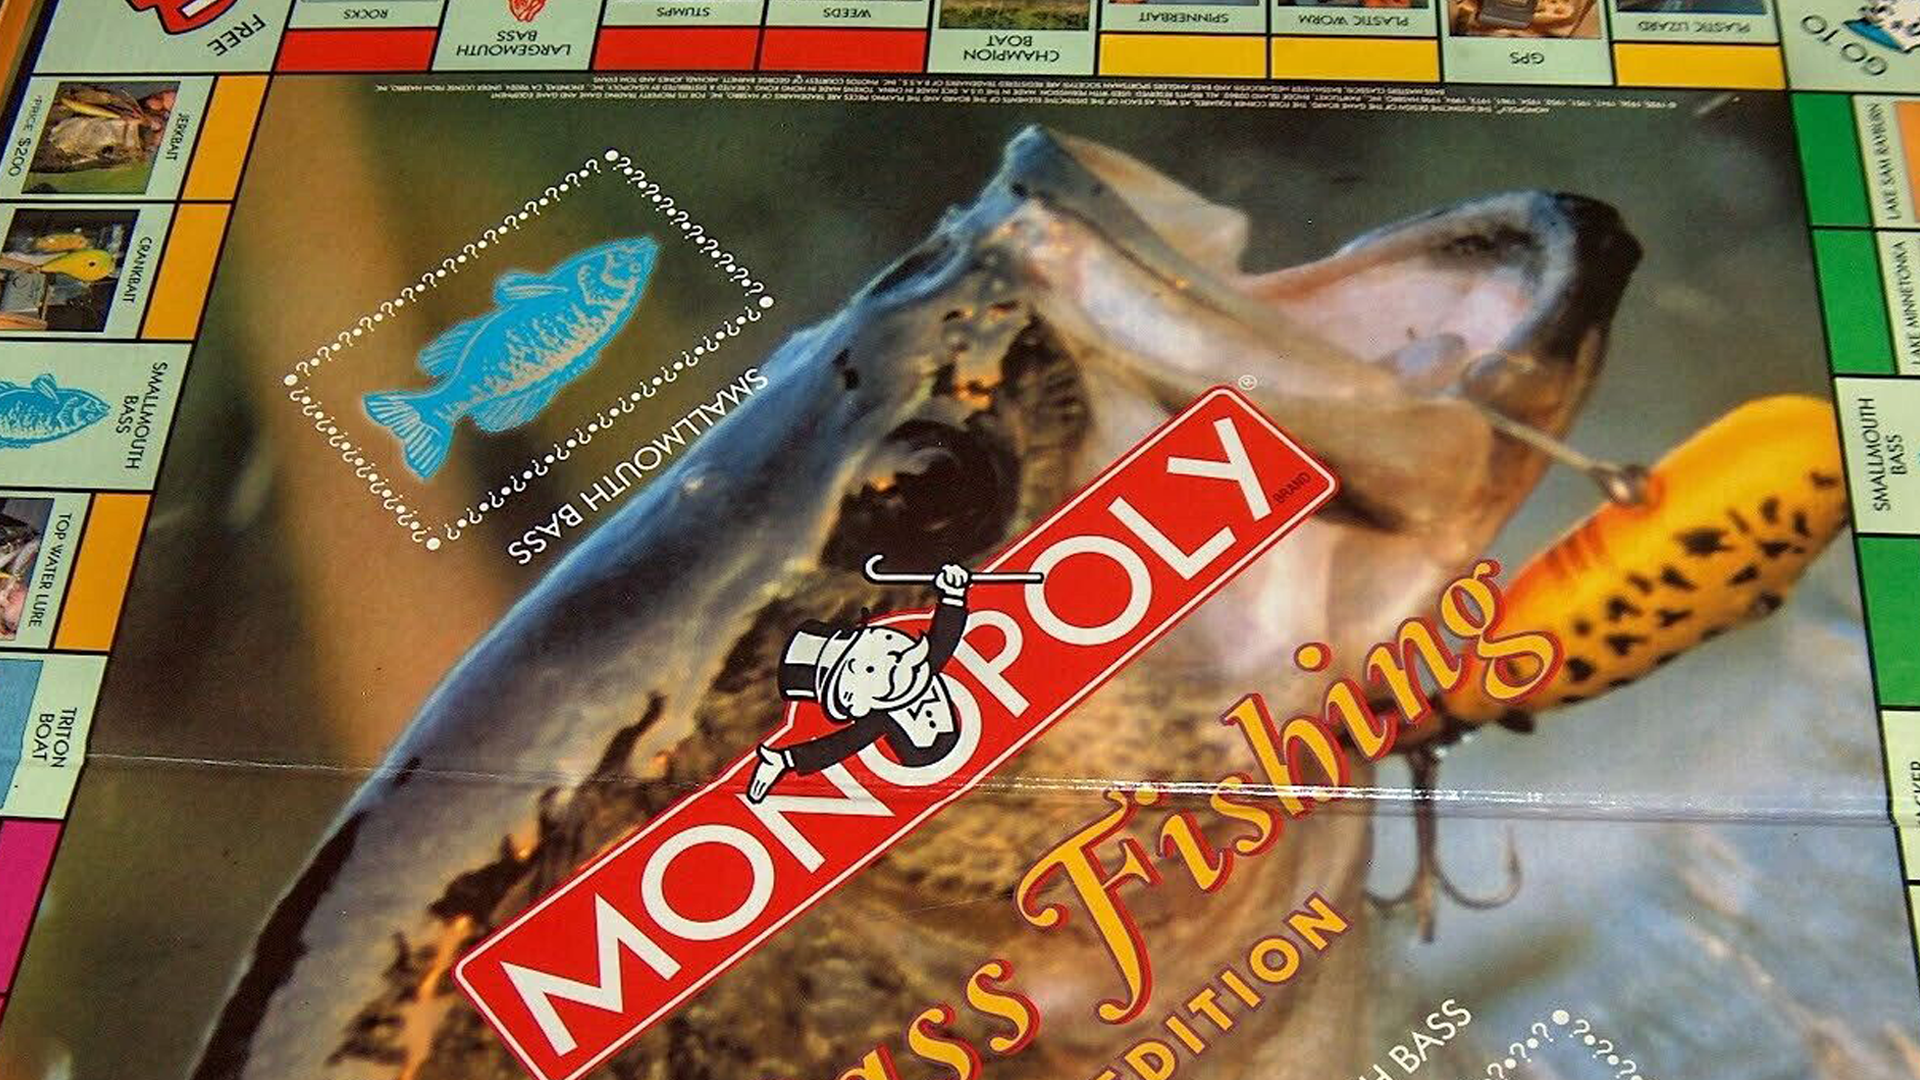 The board for Monopoly: Bass Fishing Edition.